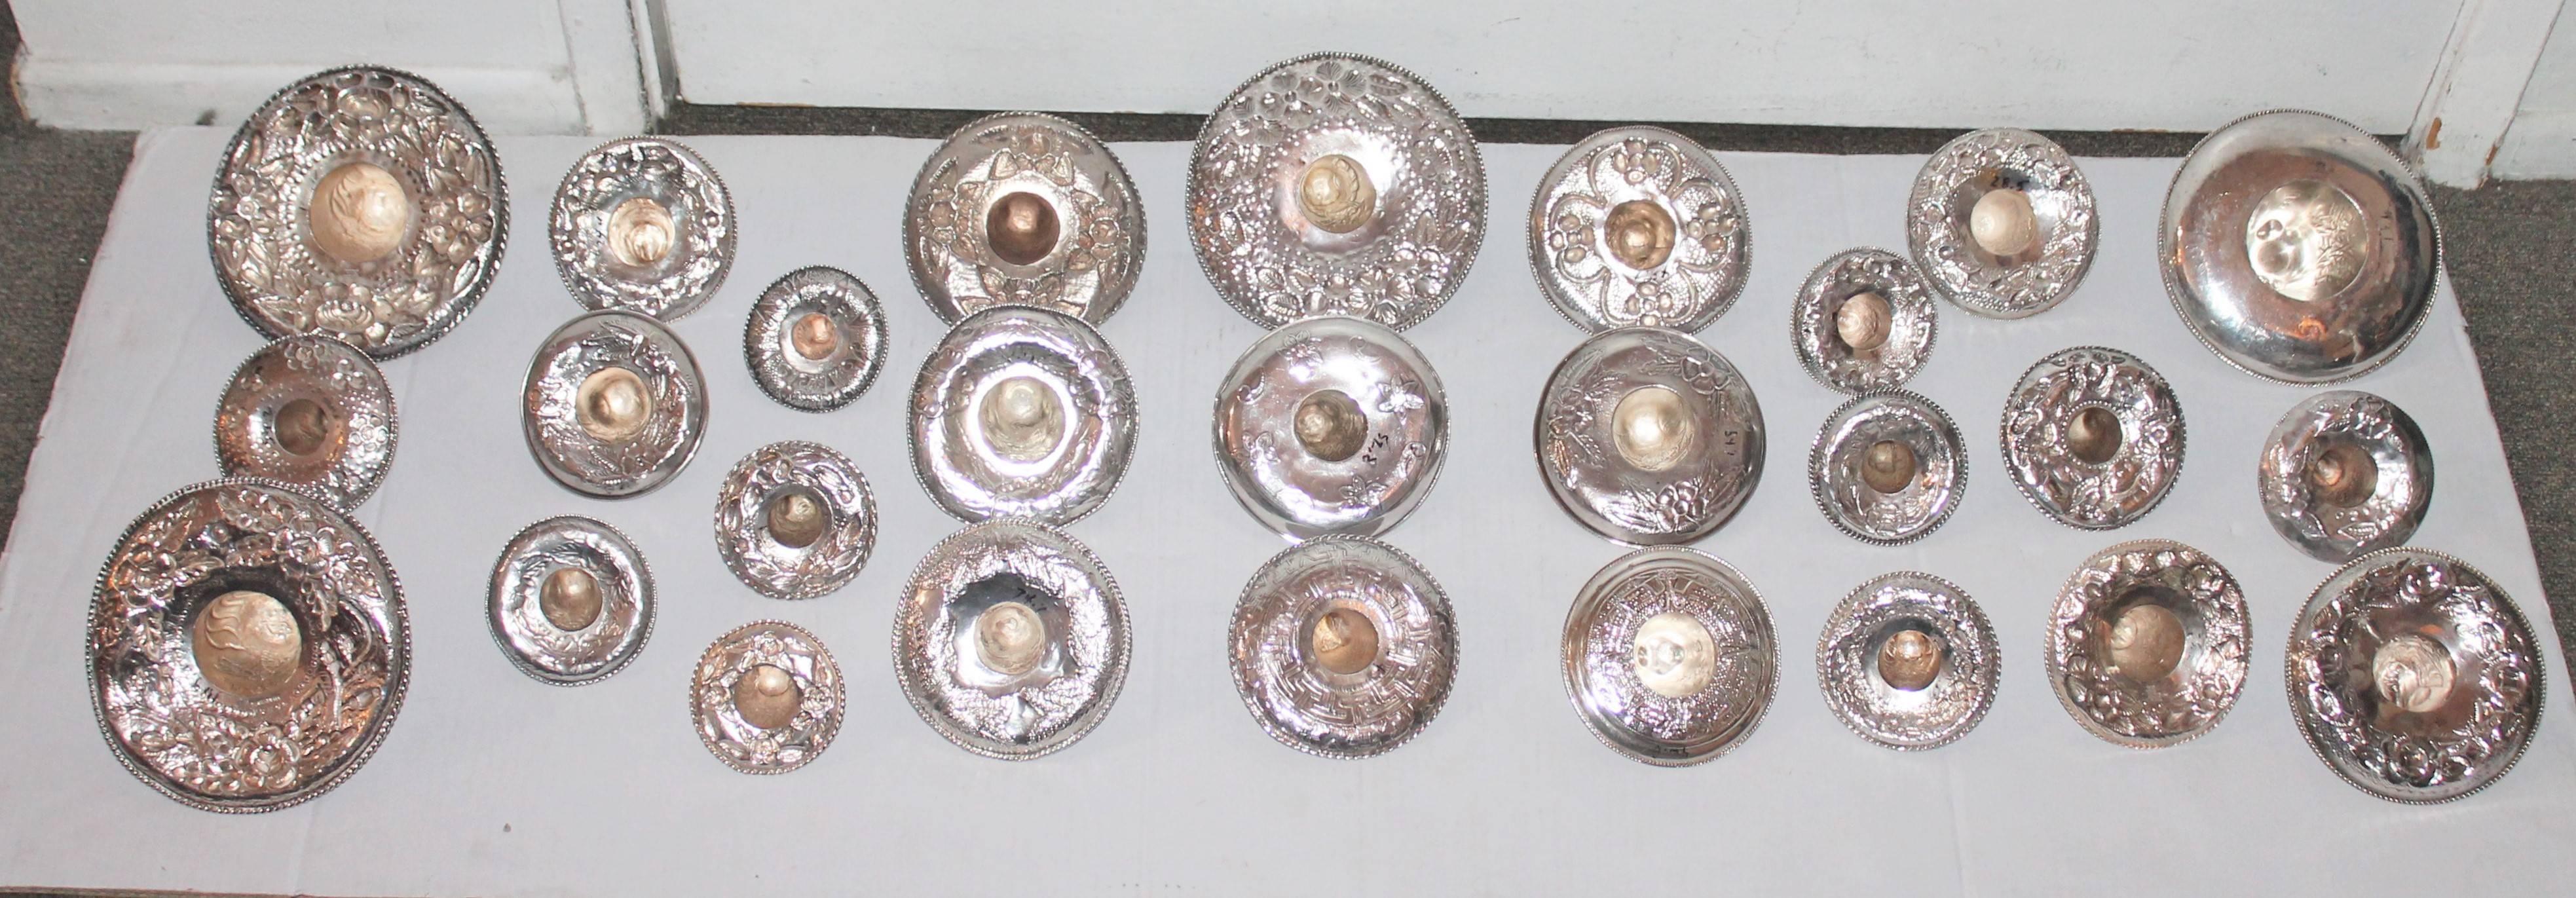 Set of 27 Decorative Mexican Sterling Silver Sombreros 1